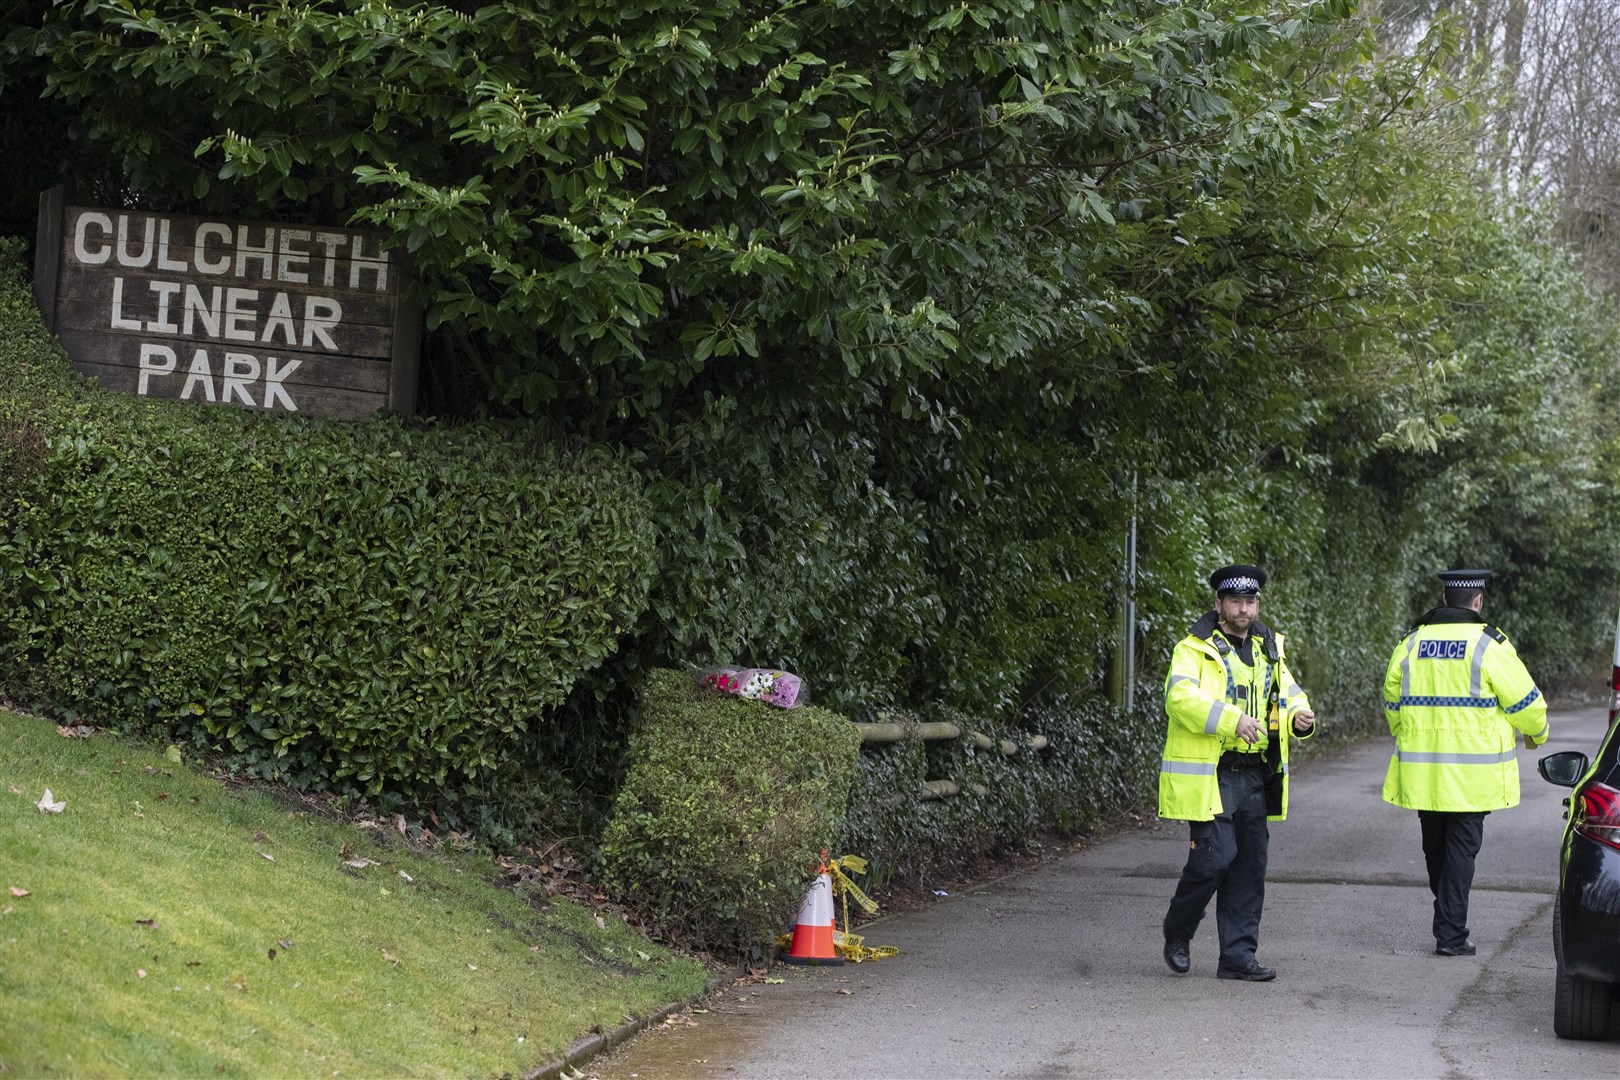 Police officers at the scene of the stabbing in Culcheth Linear Park in Warrington, Cheshire (Jason Roberts/PA)